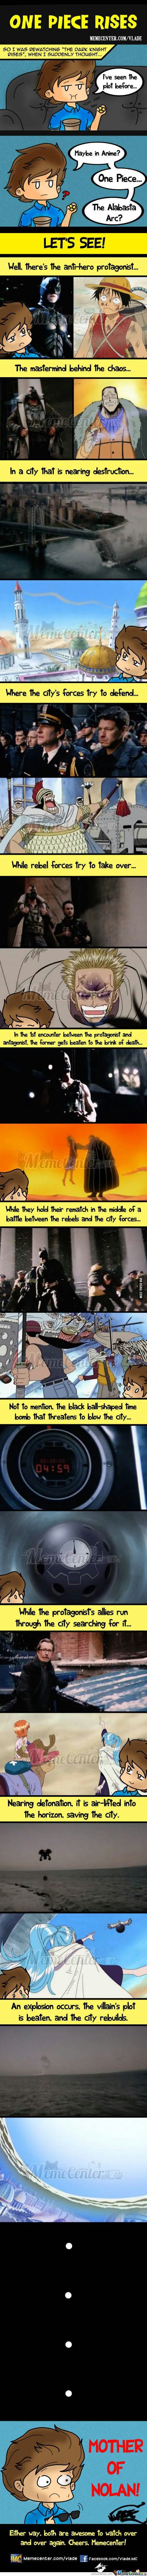 One Piece and The Dark Knight Rises Similarities